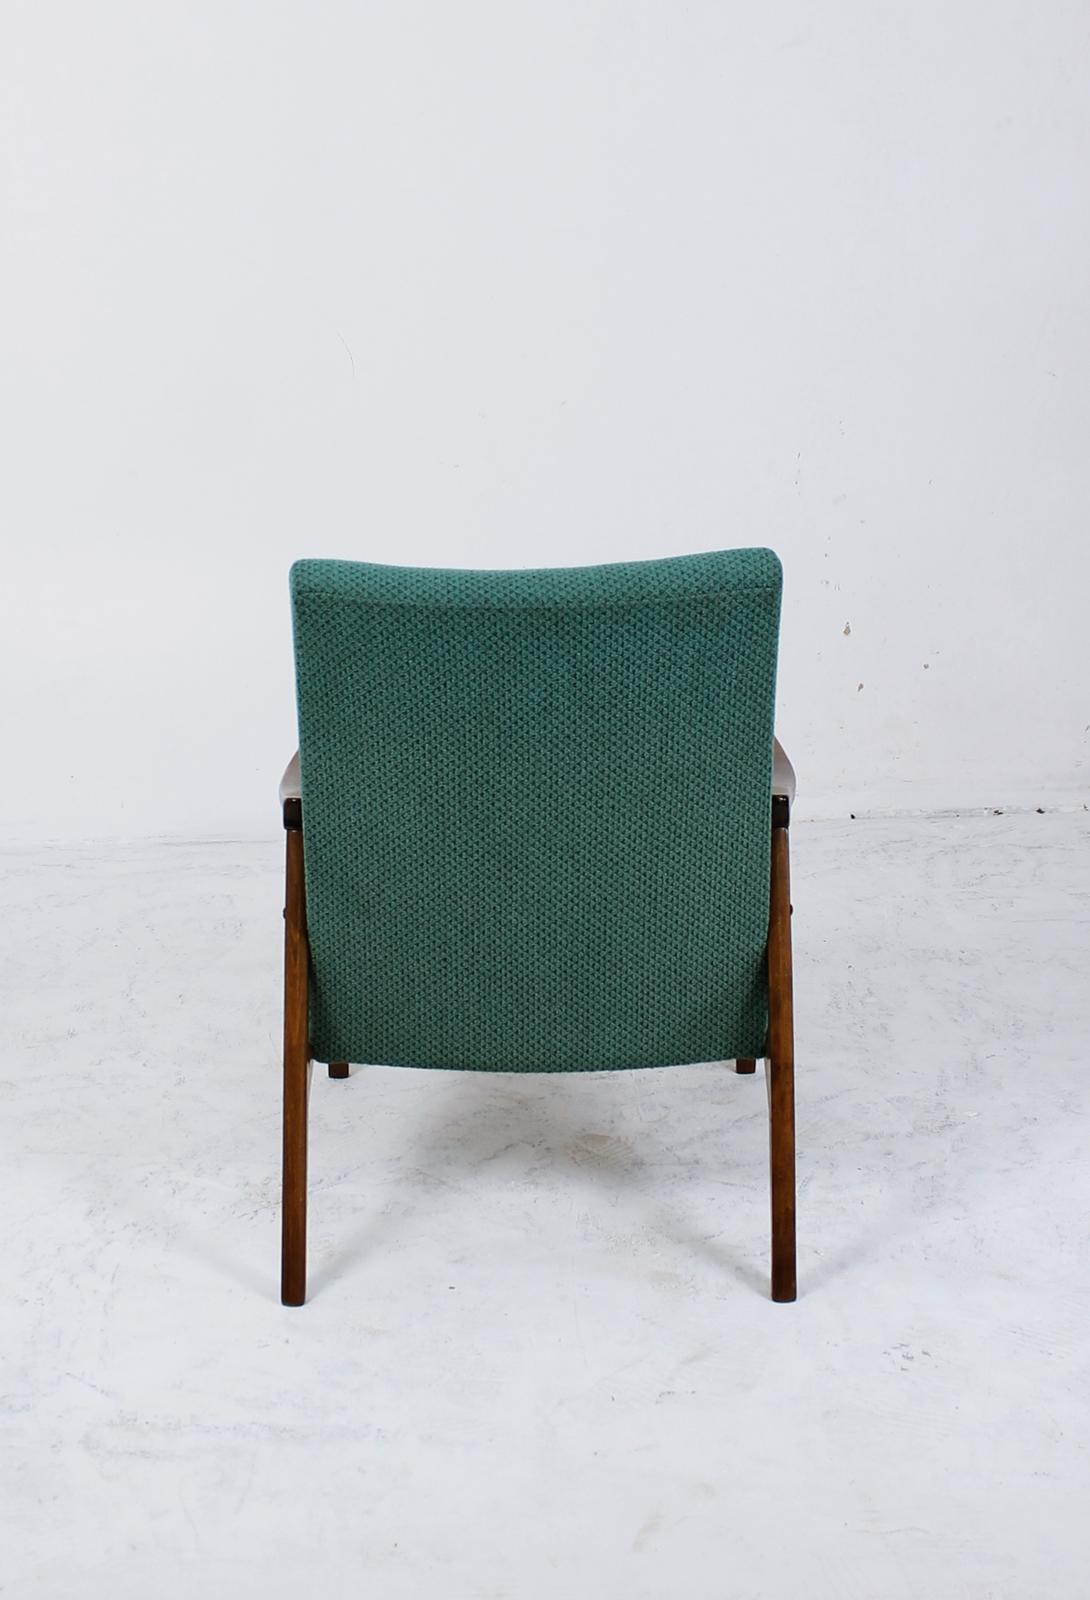 Stained Mid-Century Modern Lounge Chair by Jiří Jiroutek for Interier Praha